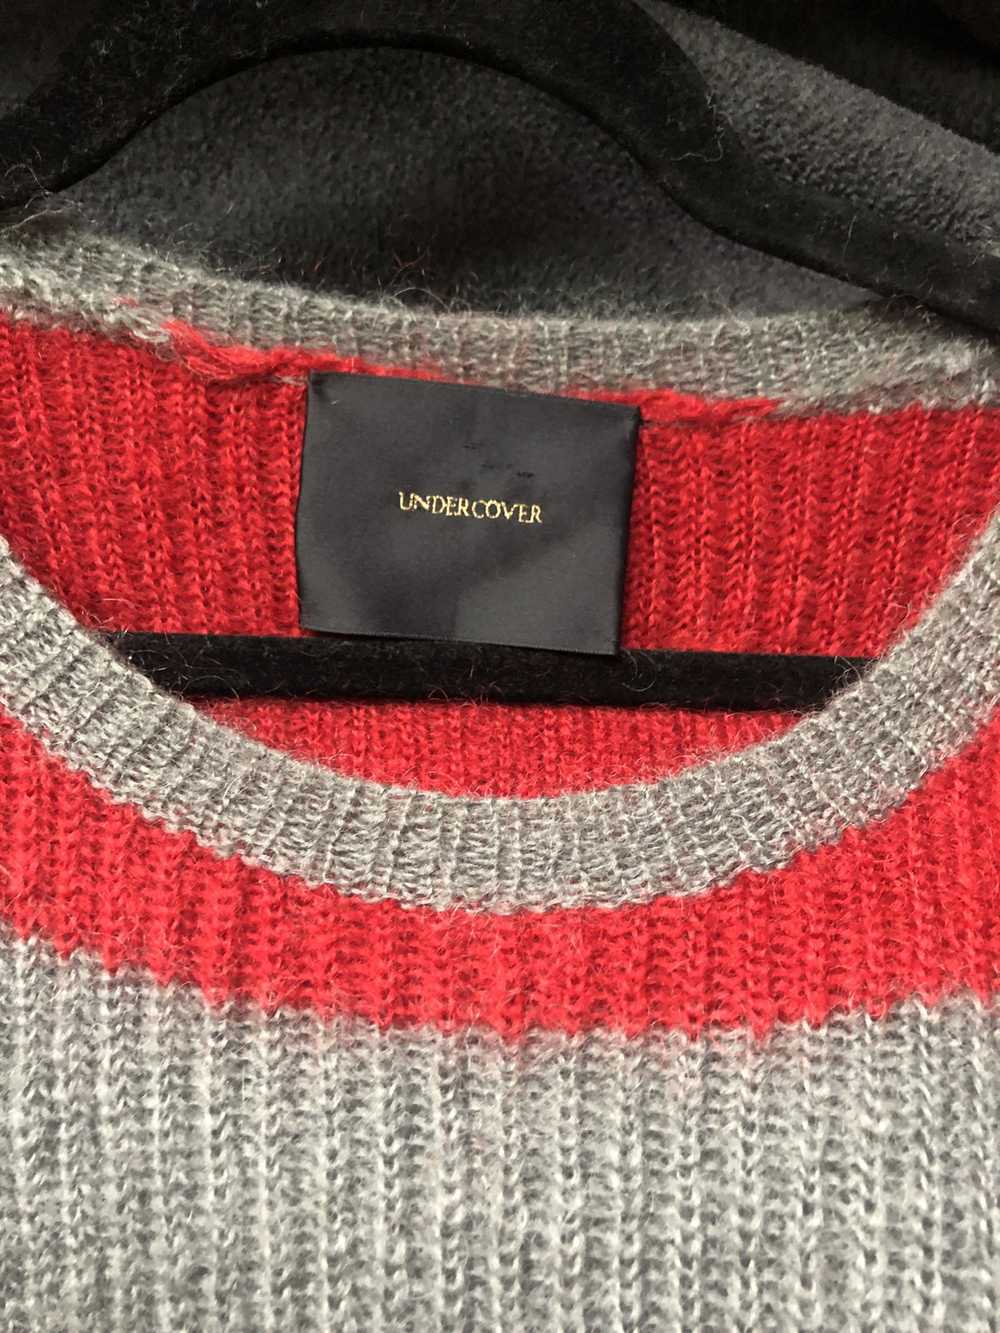 Undercover Undercover Grey and Red Striped Sweater - image 3